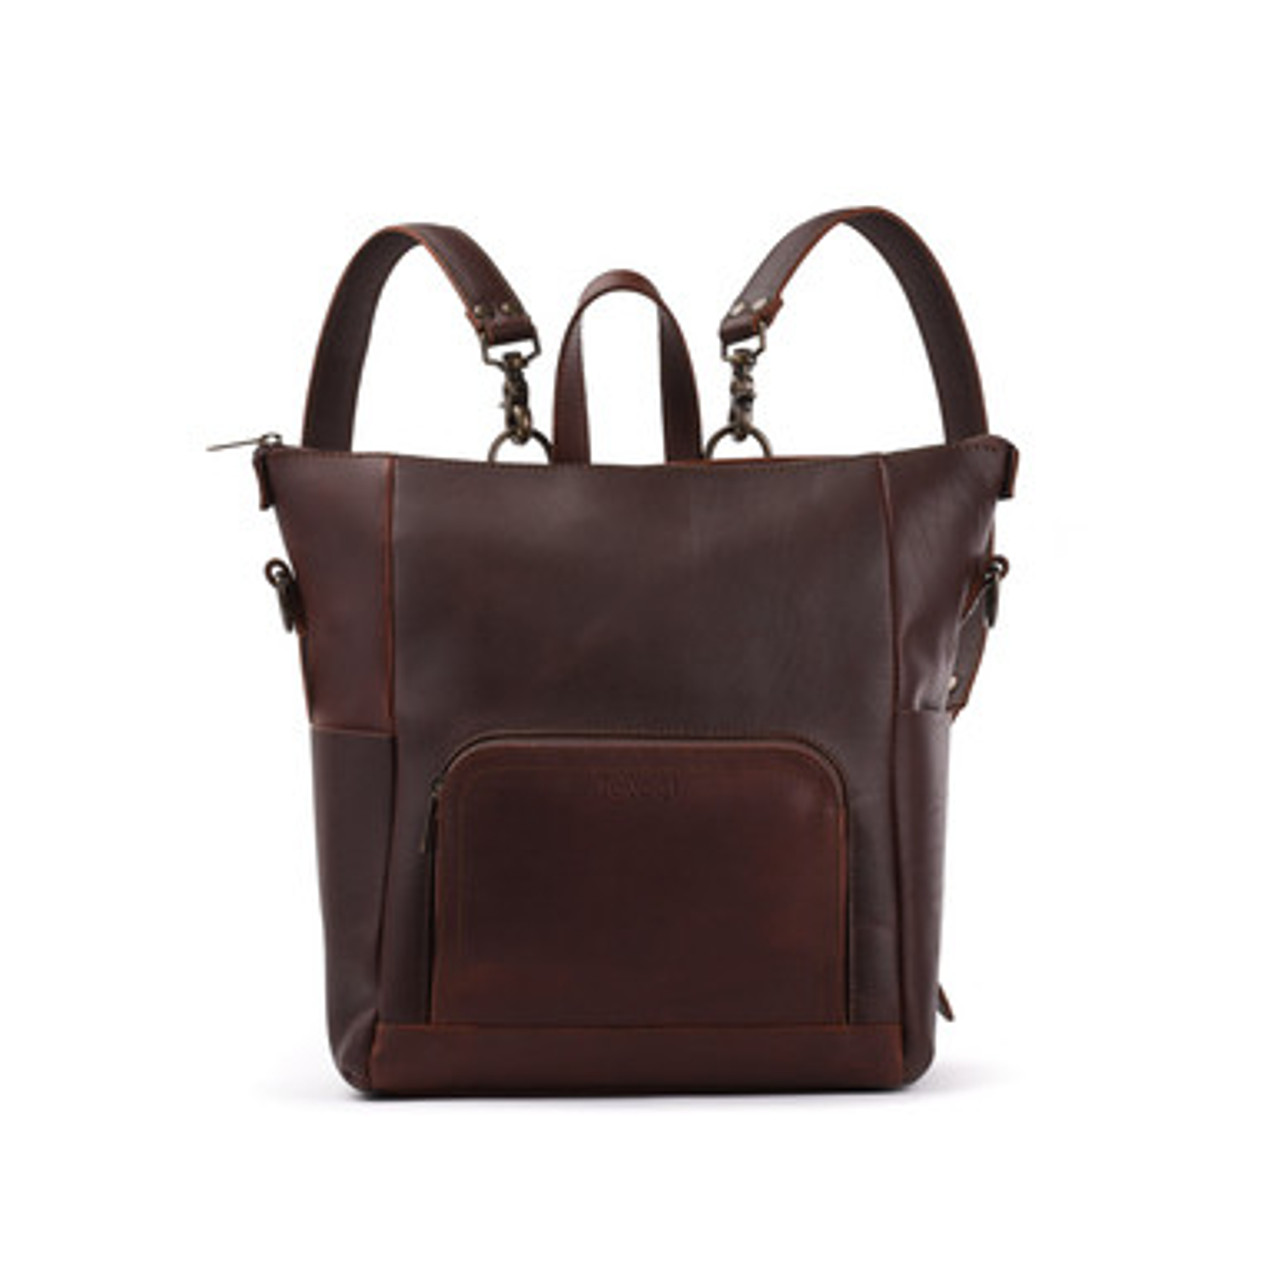 Women's Leather Backpacks | Tote Bags, Purses and Wallets | Love 41